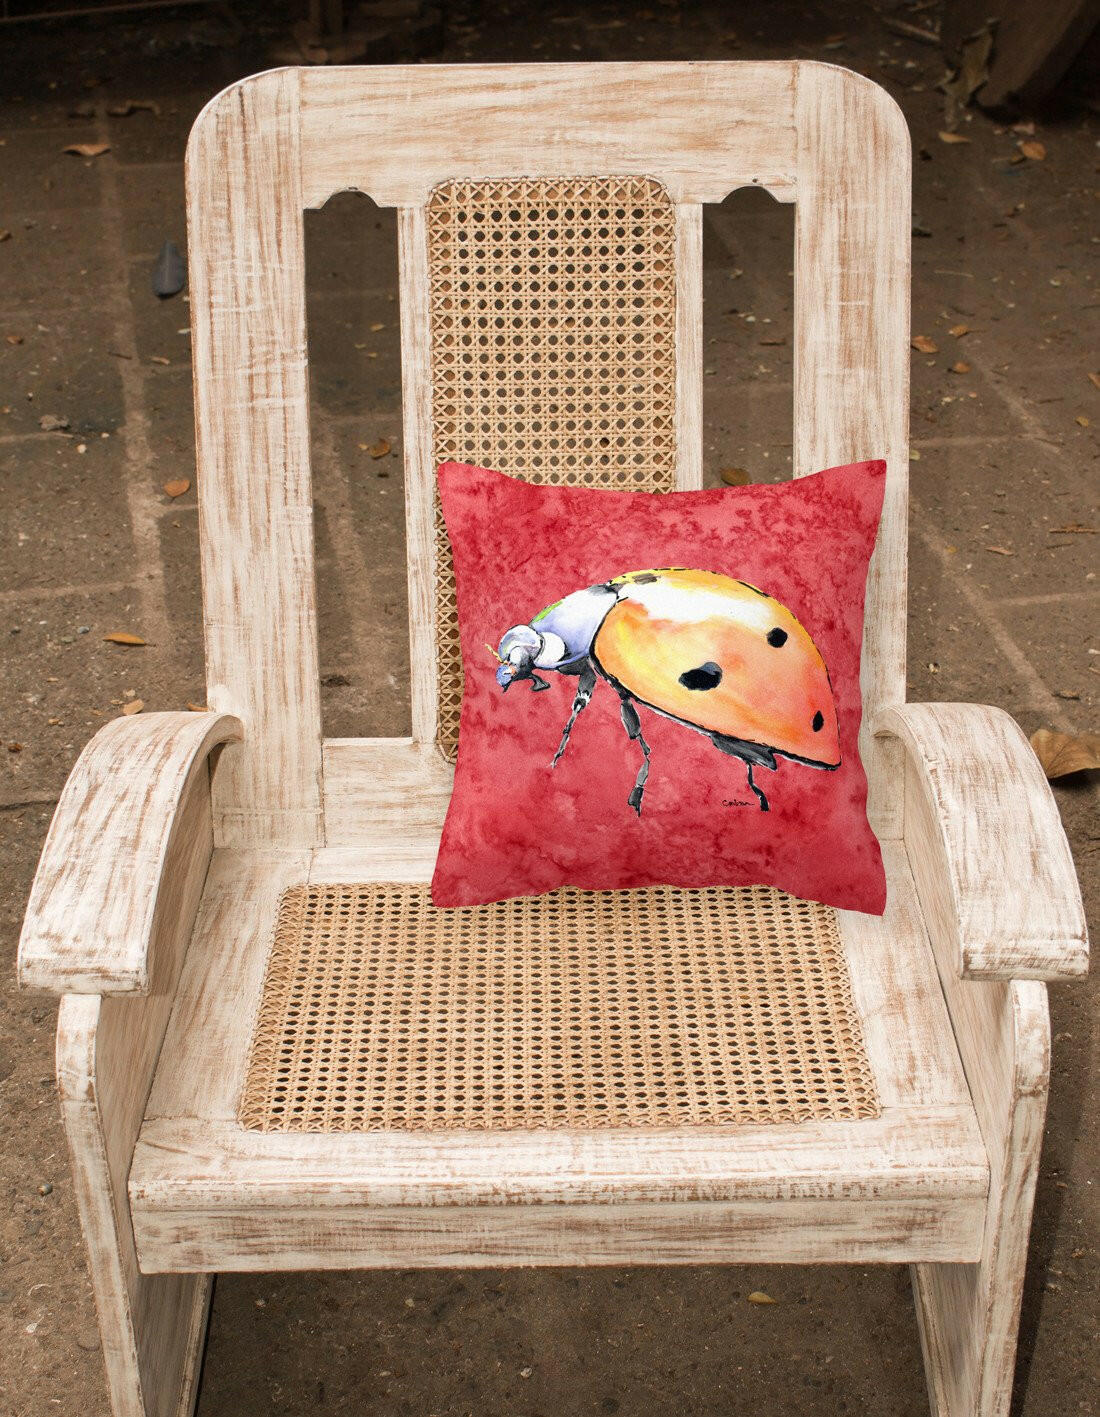 Lady Bug on Red   Canvas Fabric Decorative Pillow - the-store.com